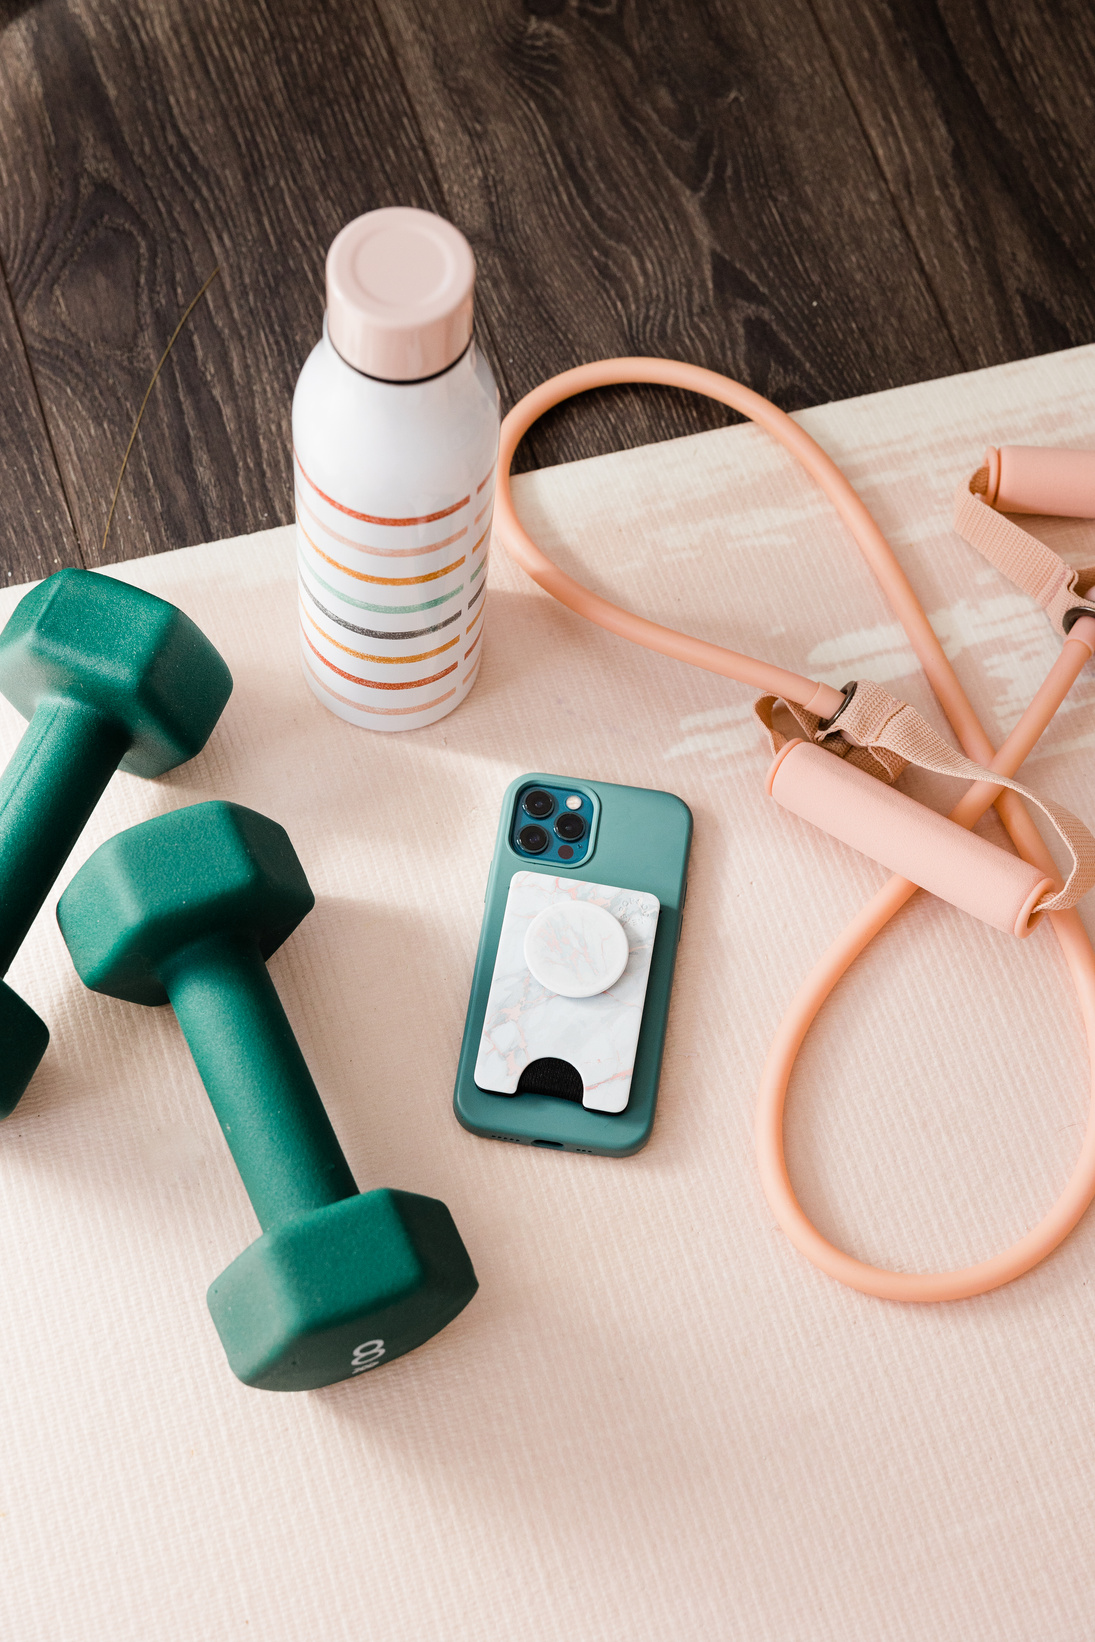 Exercise Equipment on a Table